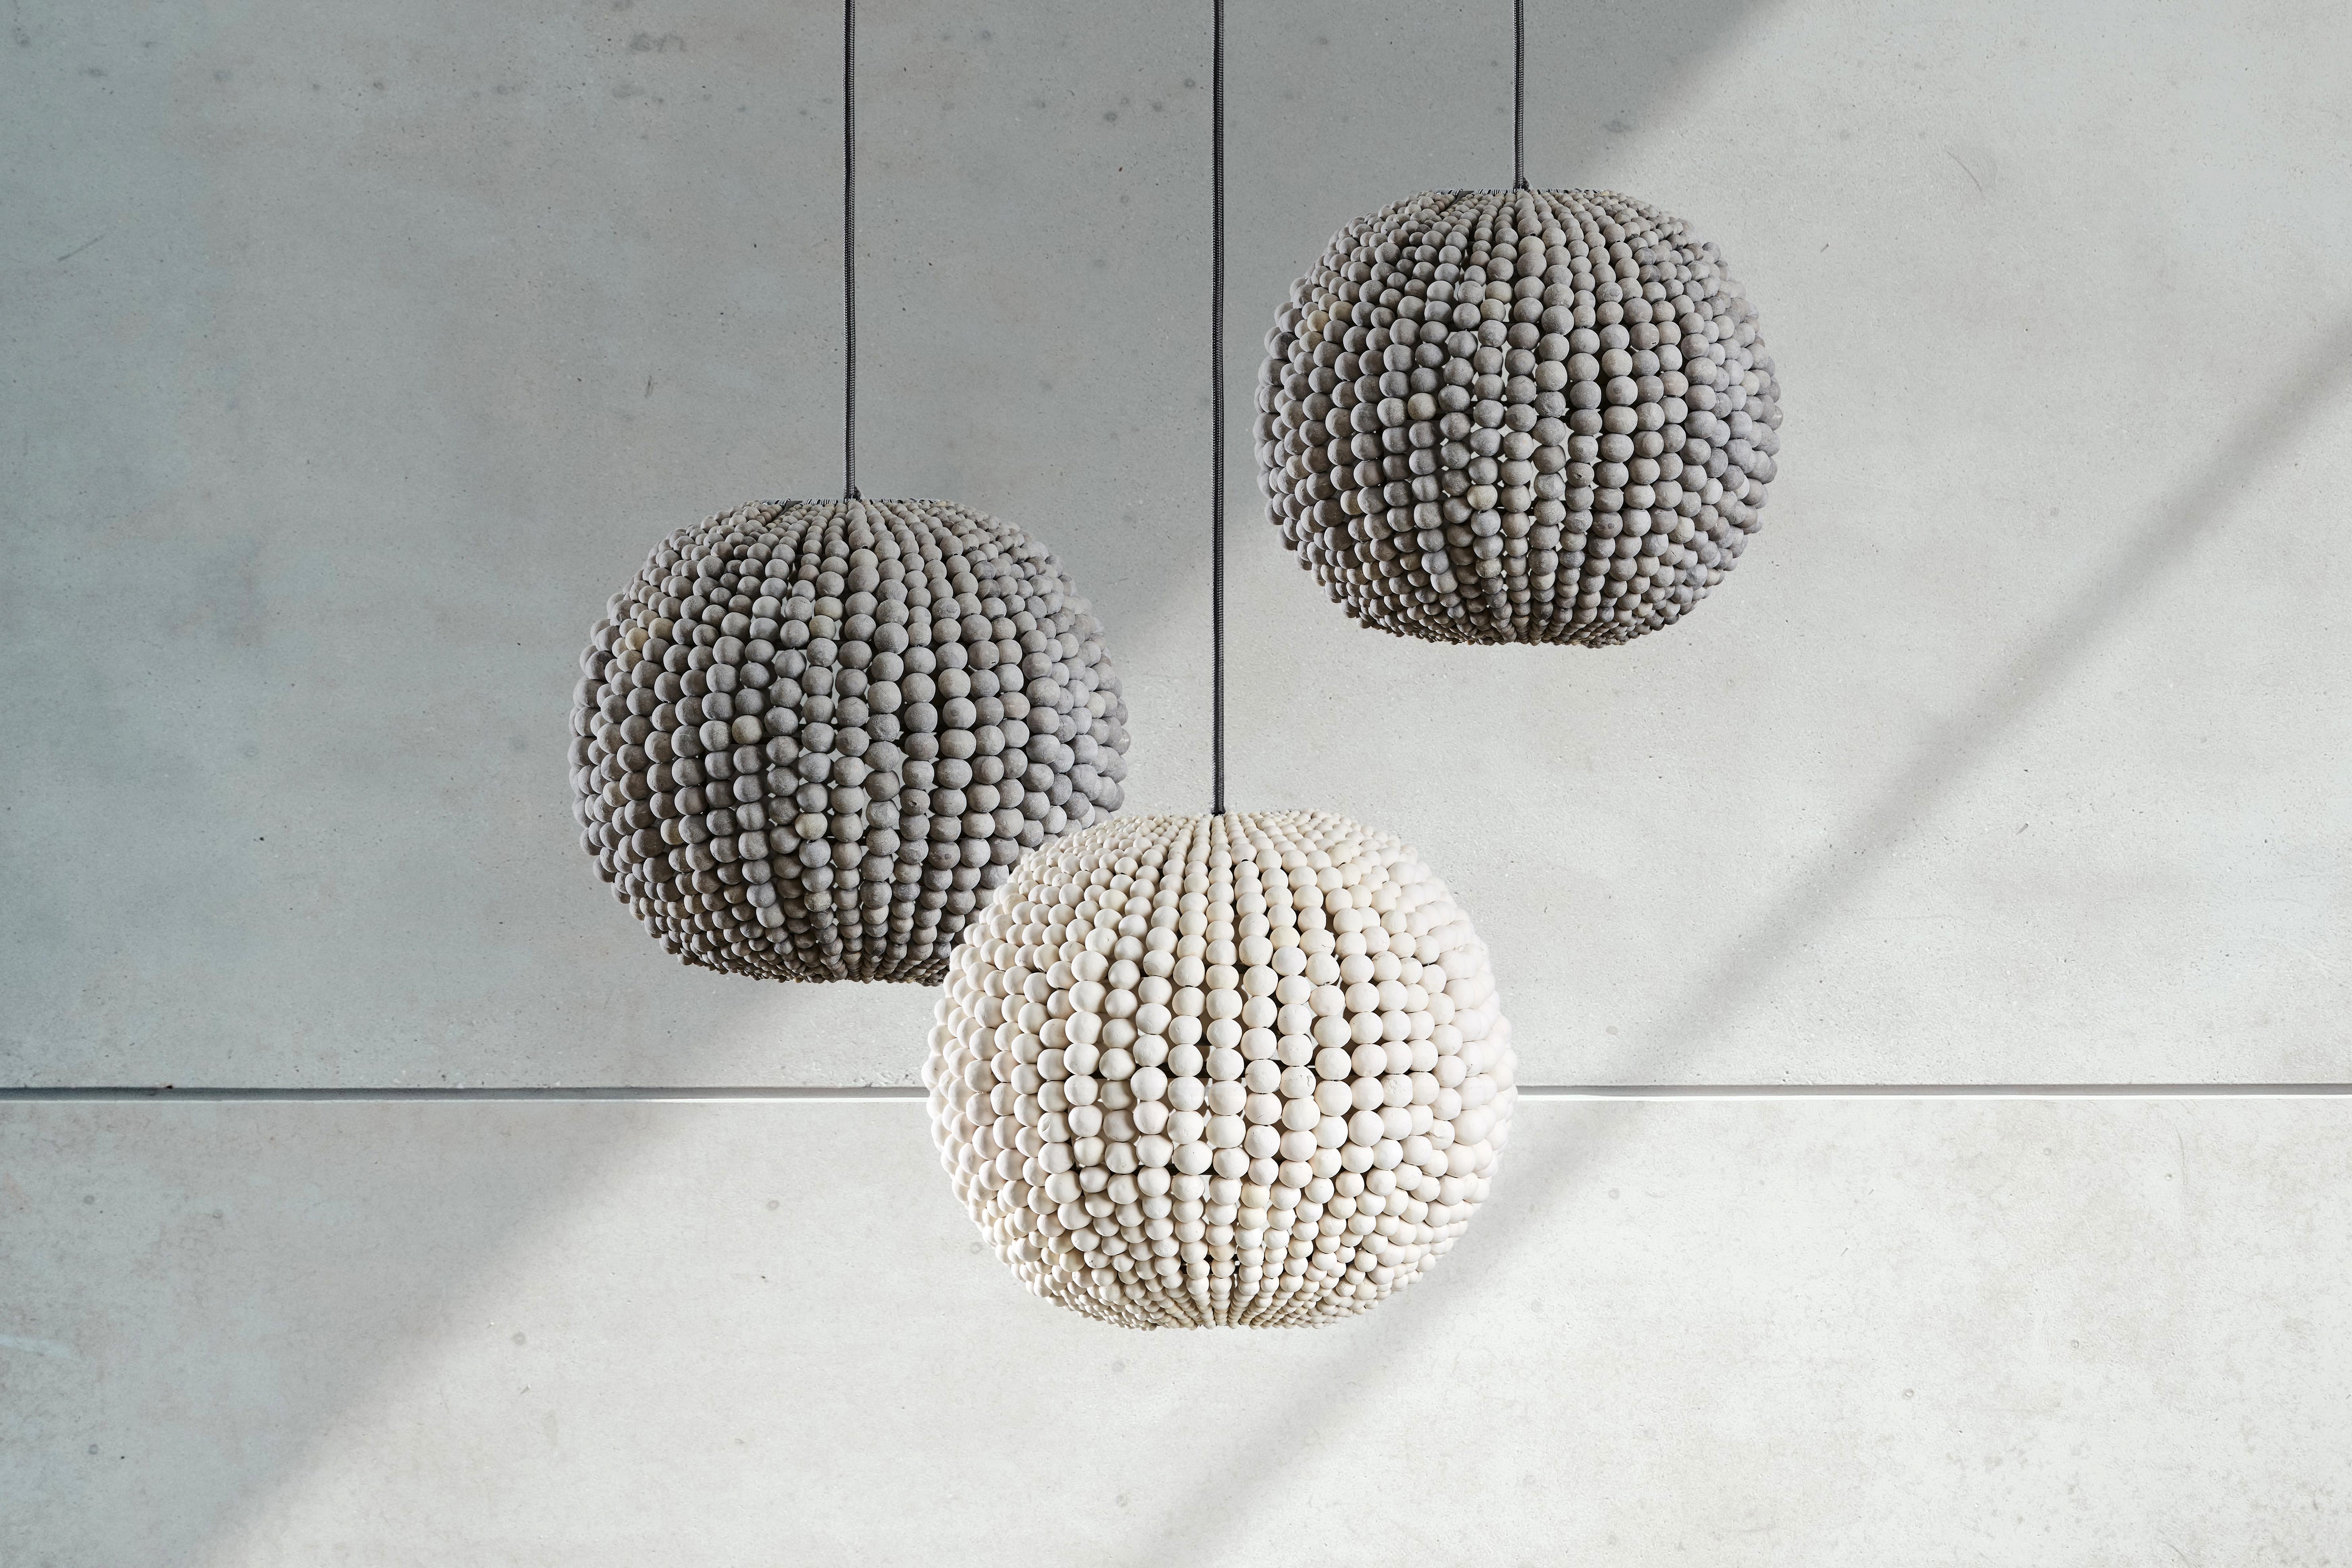 Statement clay beaded lighting, that can be suspended as a single, or in a cluster for maximum impact. Lovers of all things round will rejoice in each clay bead hand threaded onto its sphere shaped frame, creating an eye catching pendant with zero